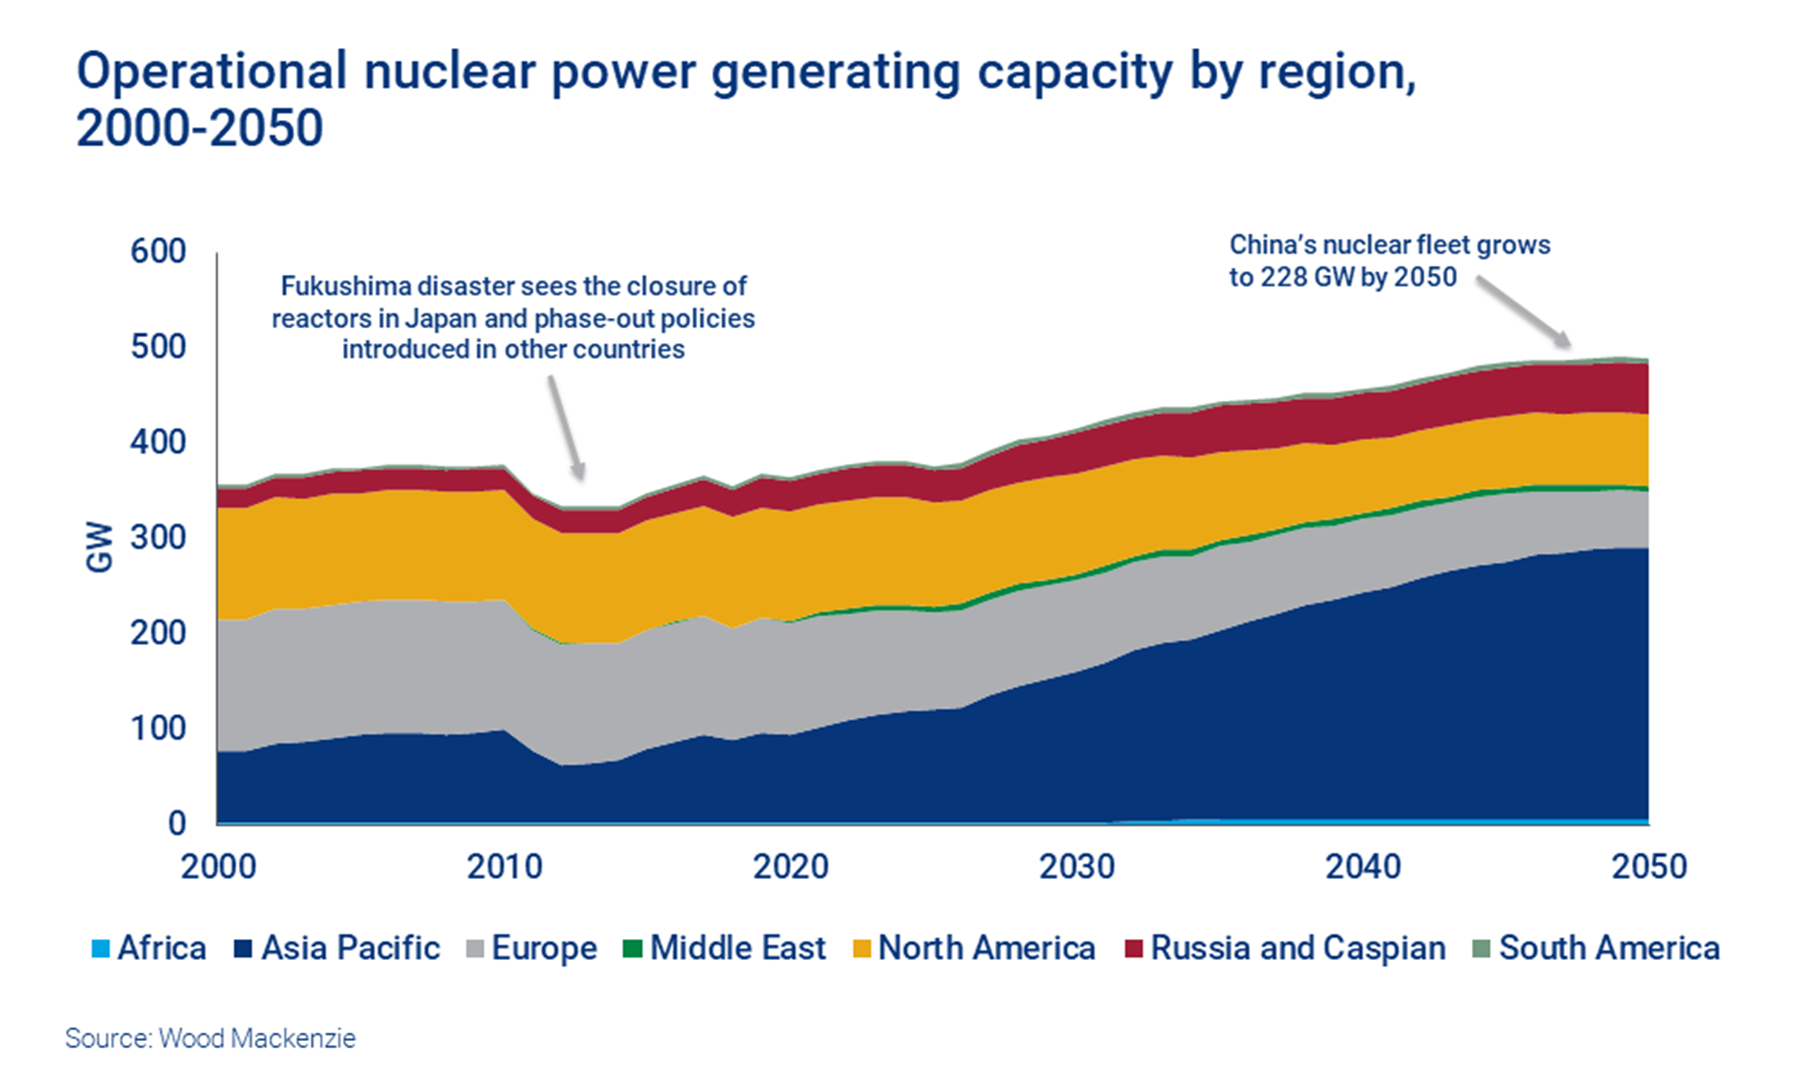 Chart shows operational nuclear power capacity by region. By 2050, China will account for nearly half of global operational nuclear capacity